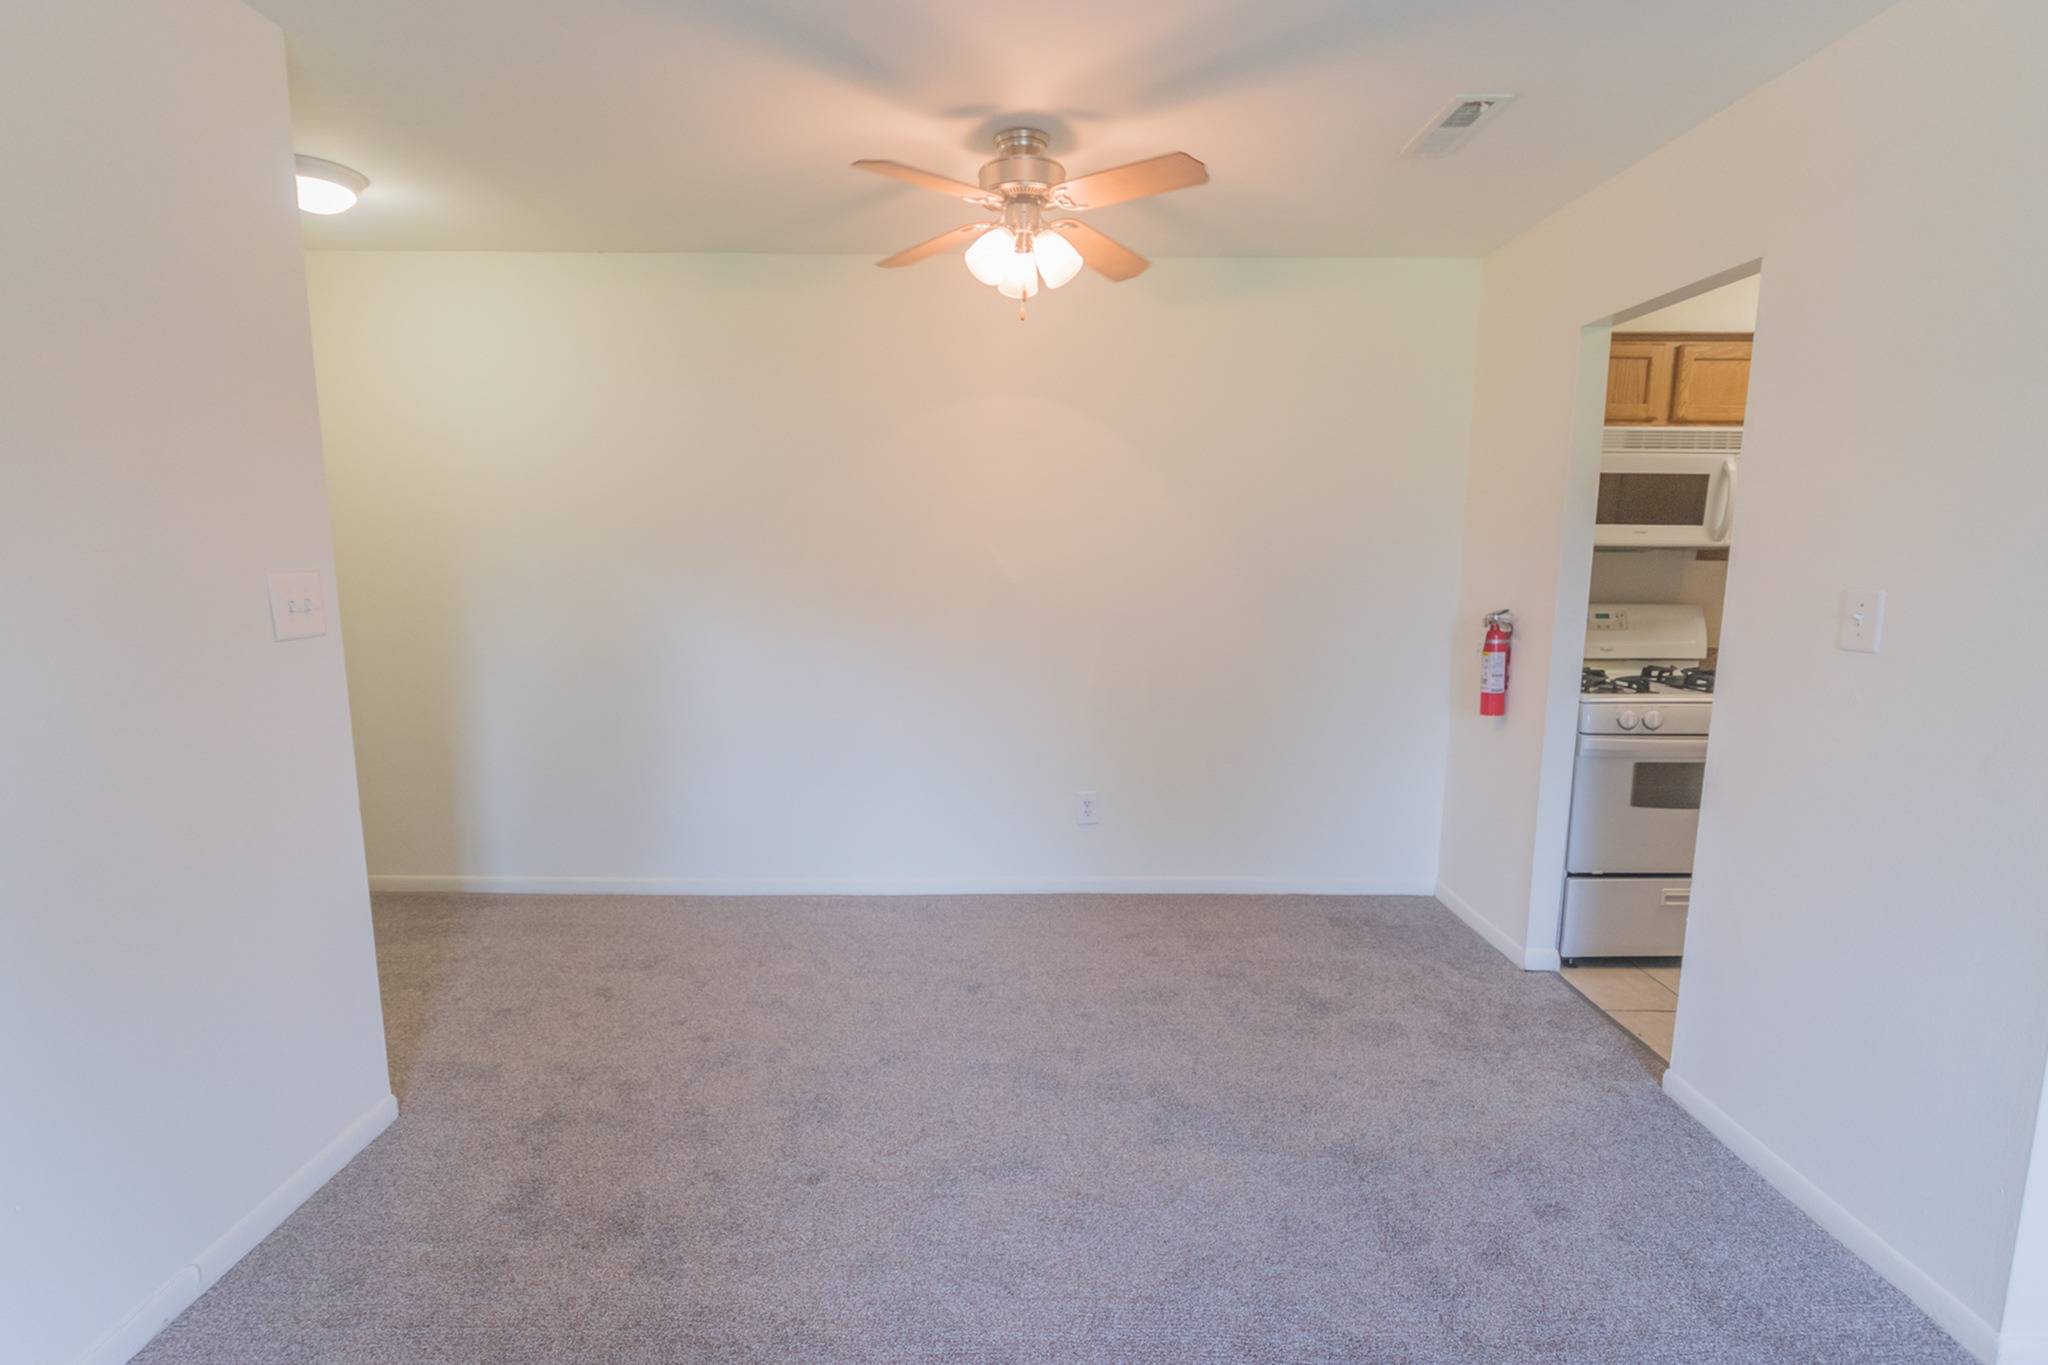 Dining area of an apartment unfurnished, fitted with carpet flooring, and a ceiling fan